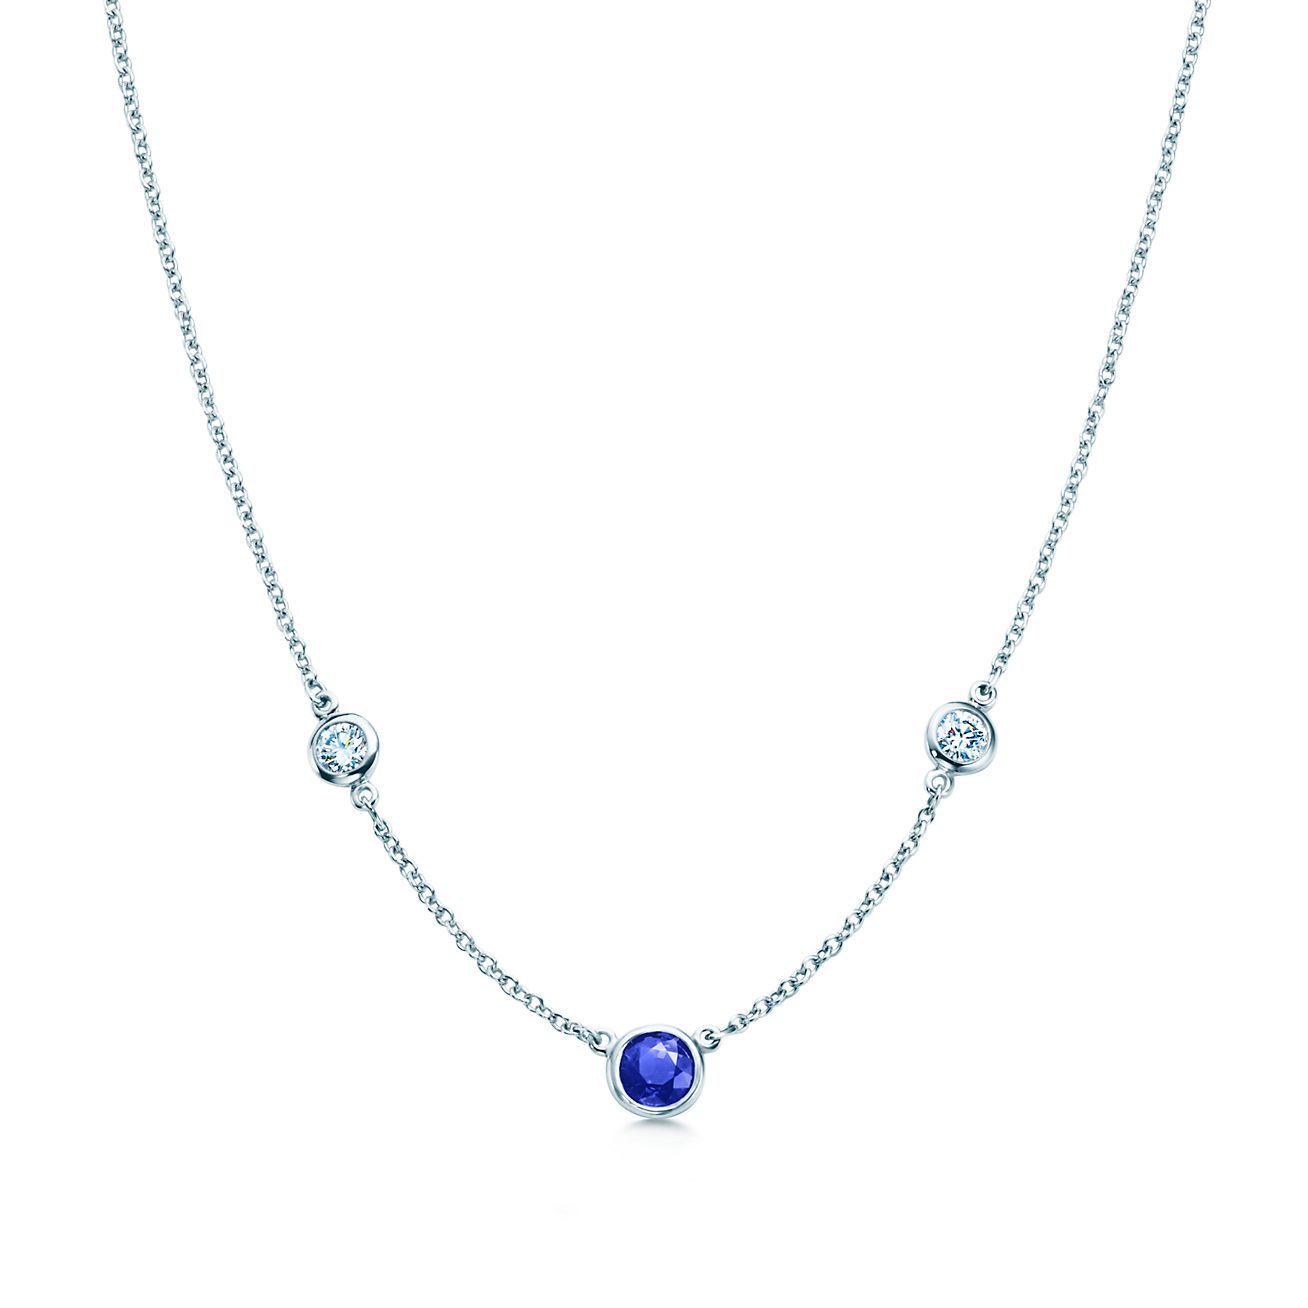 Elsa Peretti Color by The Yard Necklace of Diamonds and A Sapphire in Platinum